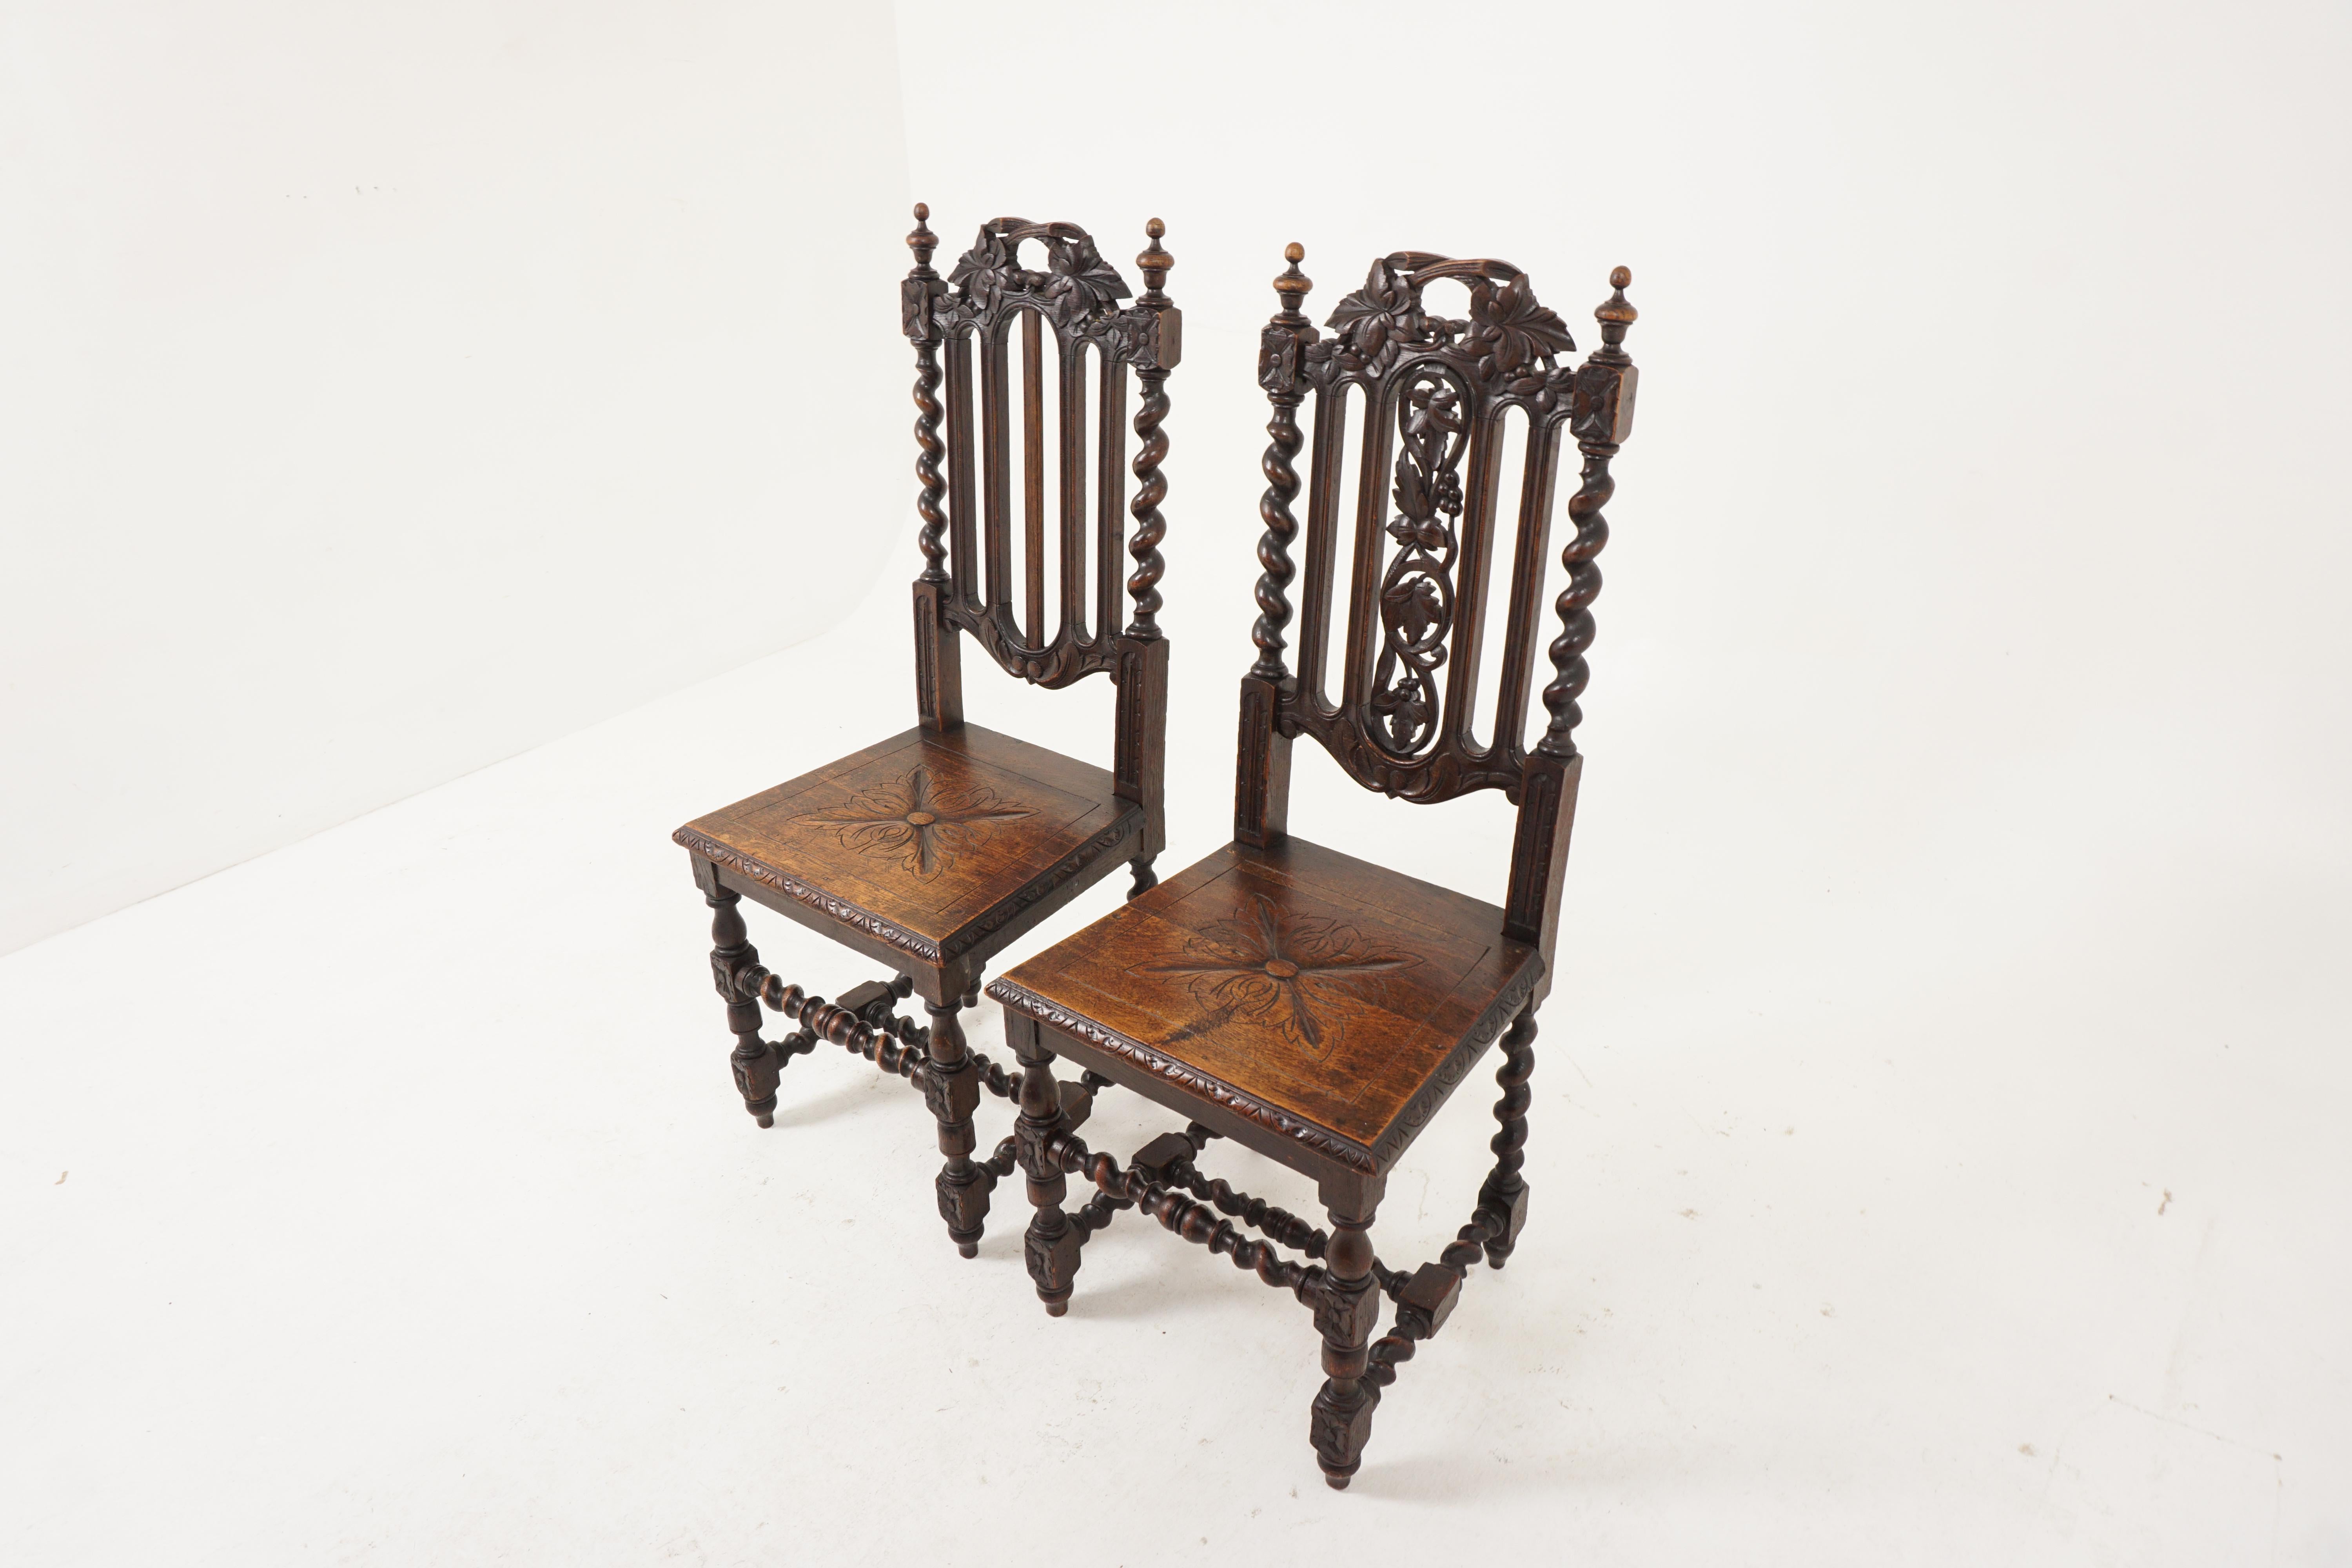 Antique Victorian carved oak barley twist hall chair, Jacobsen, Scotland 1880, B2614

Scotland 1880
Solid oak
Original finish
Featuring carved top rail with grapes and vine leaves.
Pair of Barley twist supports with finials on top.
Further